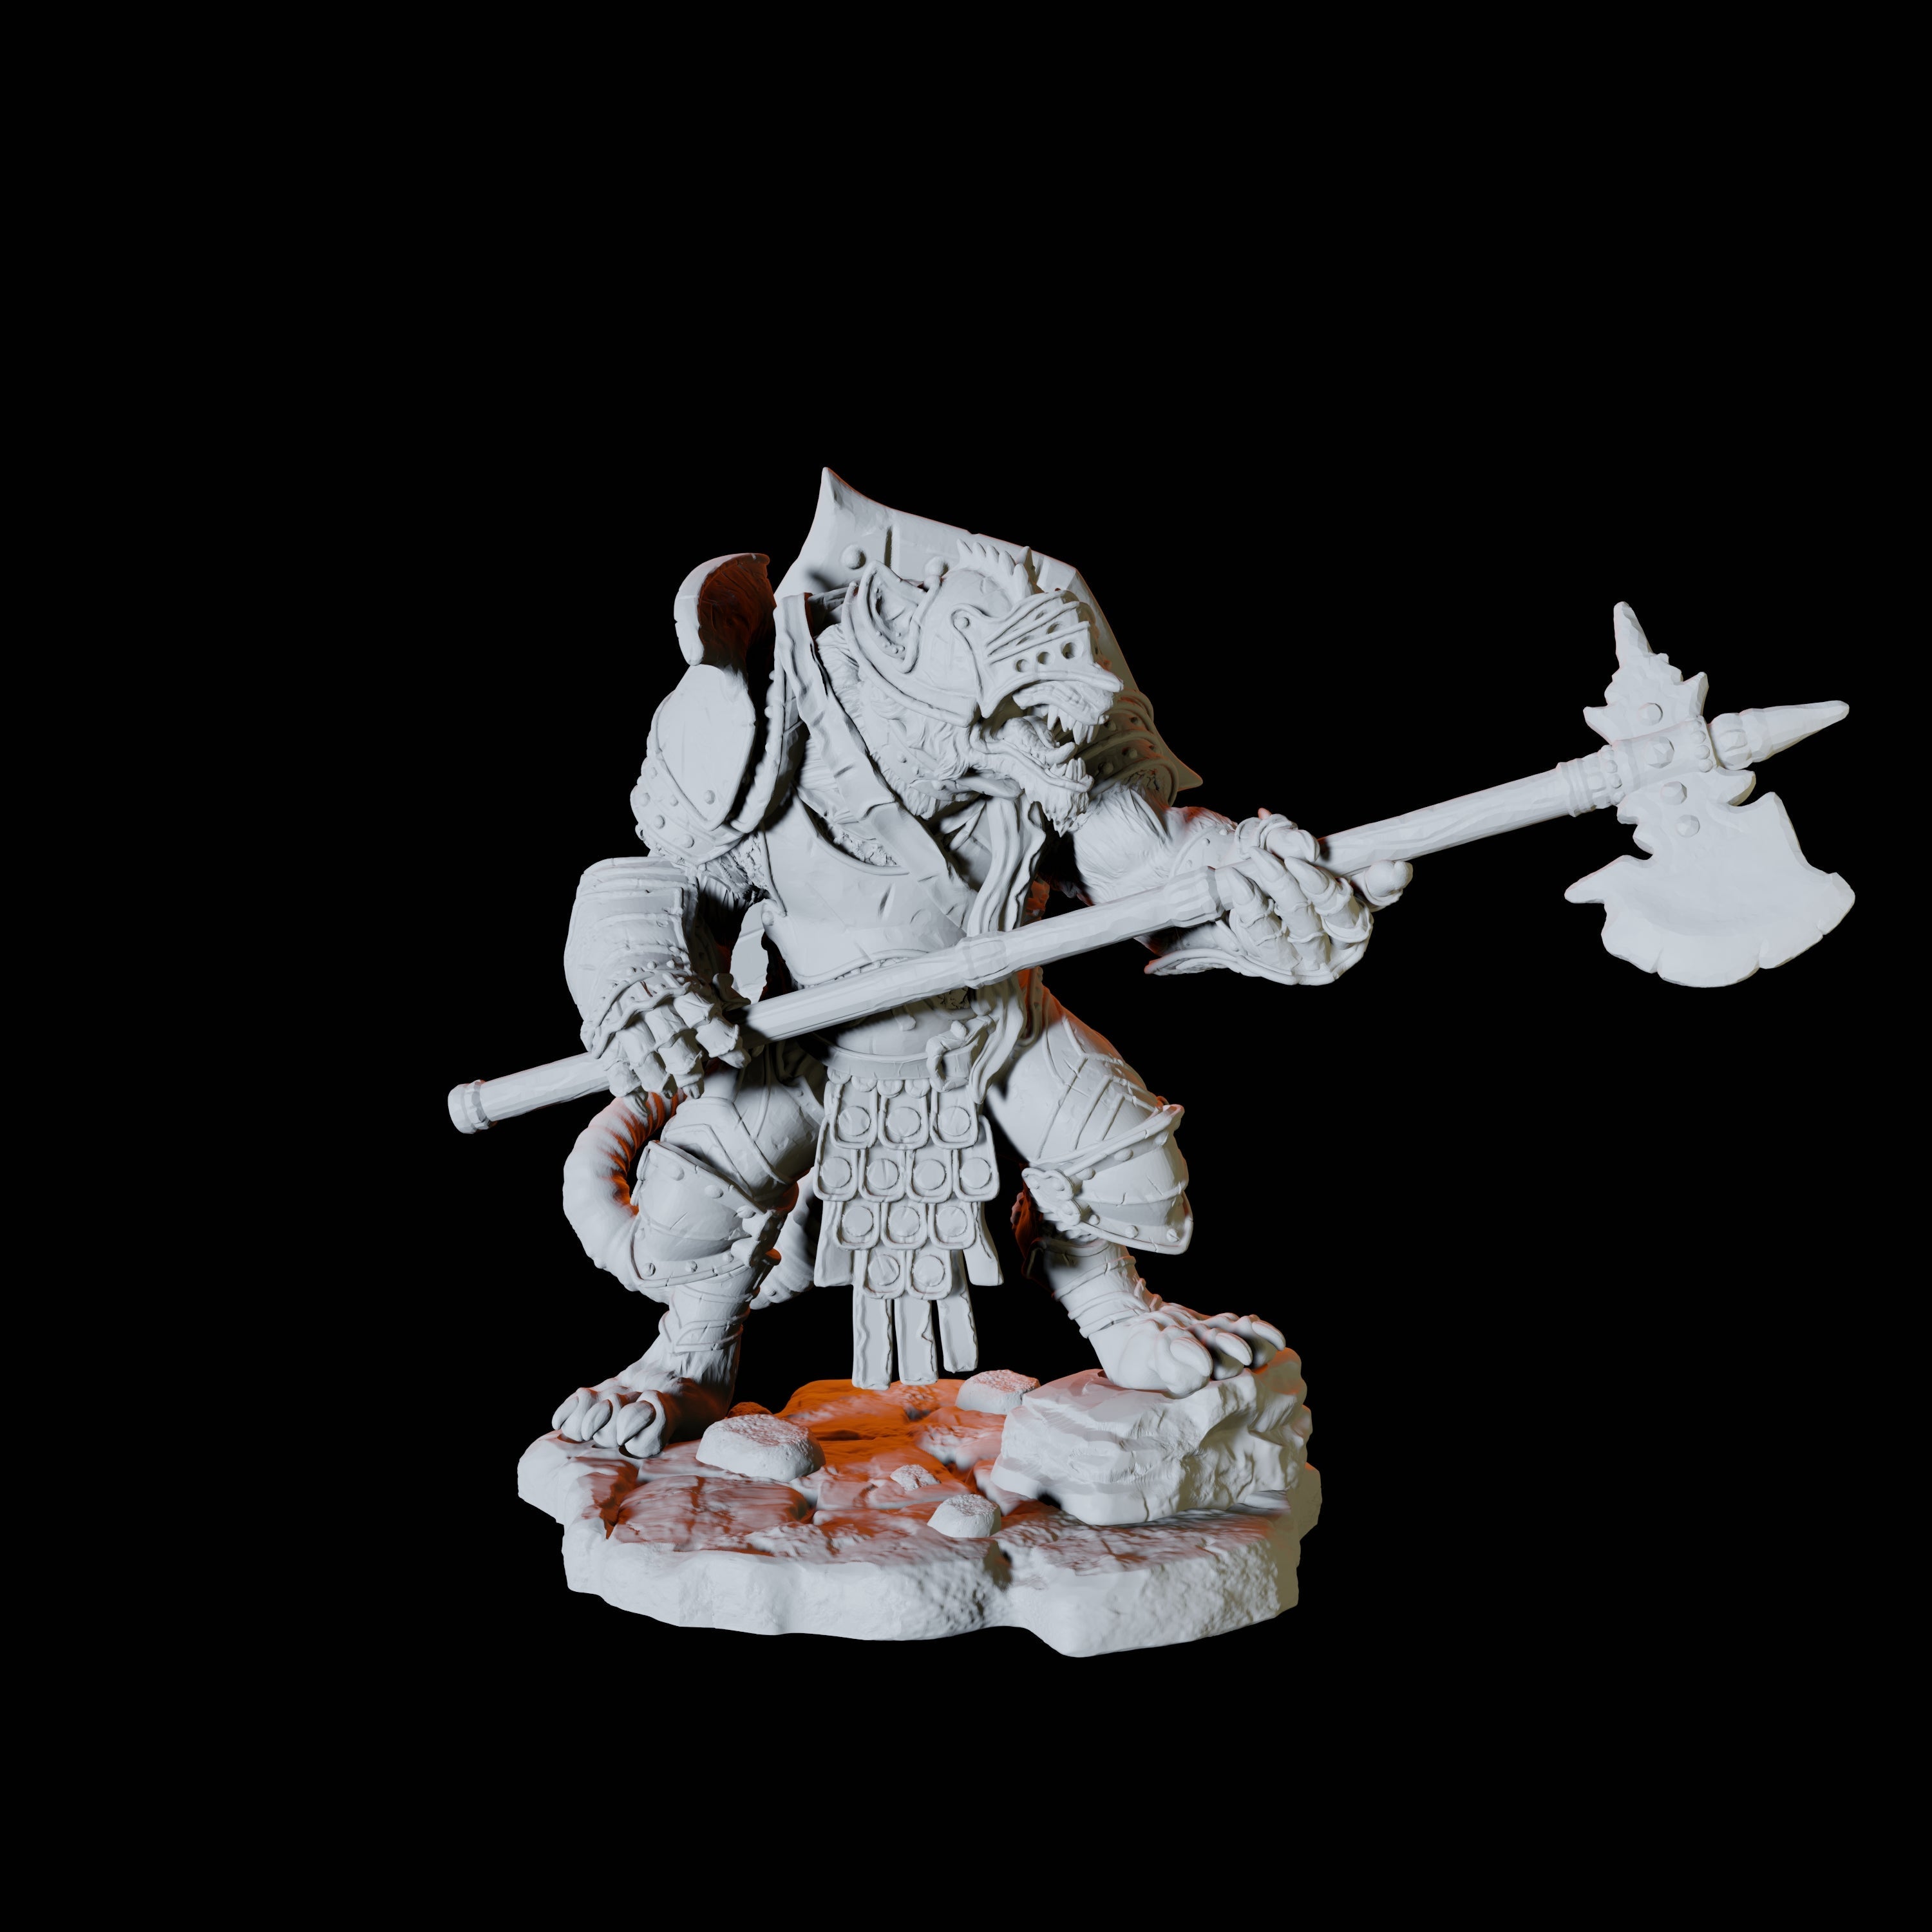 Ratfolk Soldier C Miniature for Dungeons and Dragons, Pathfinder or other TTRPGs